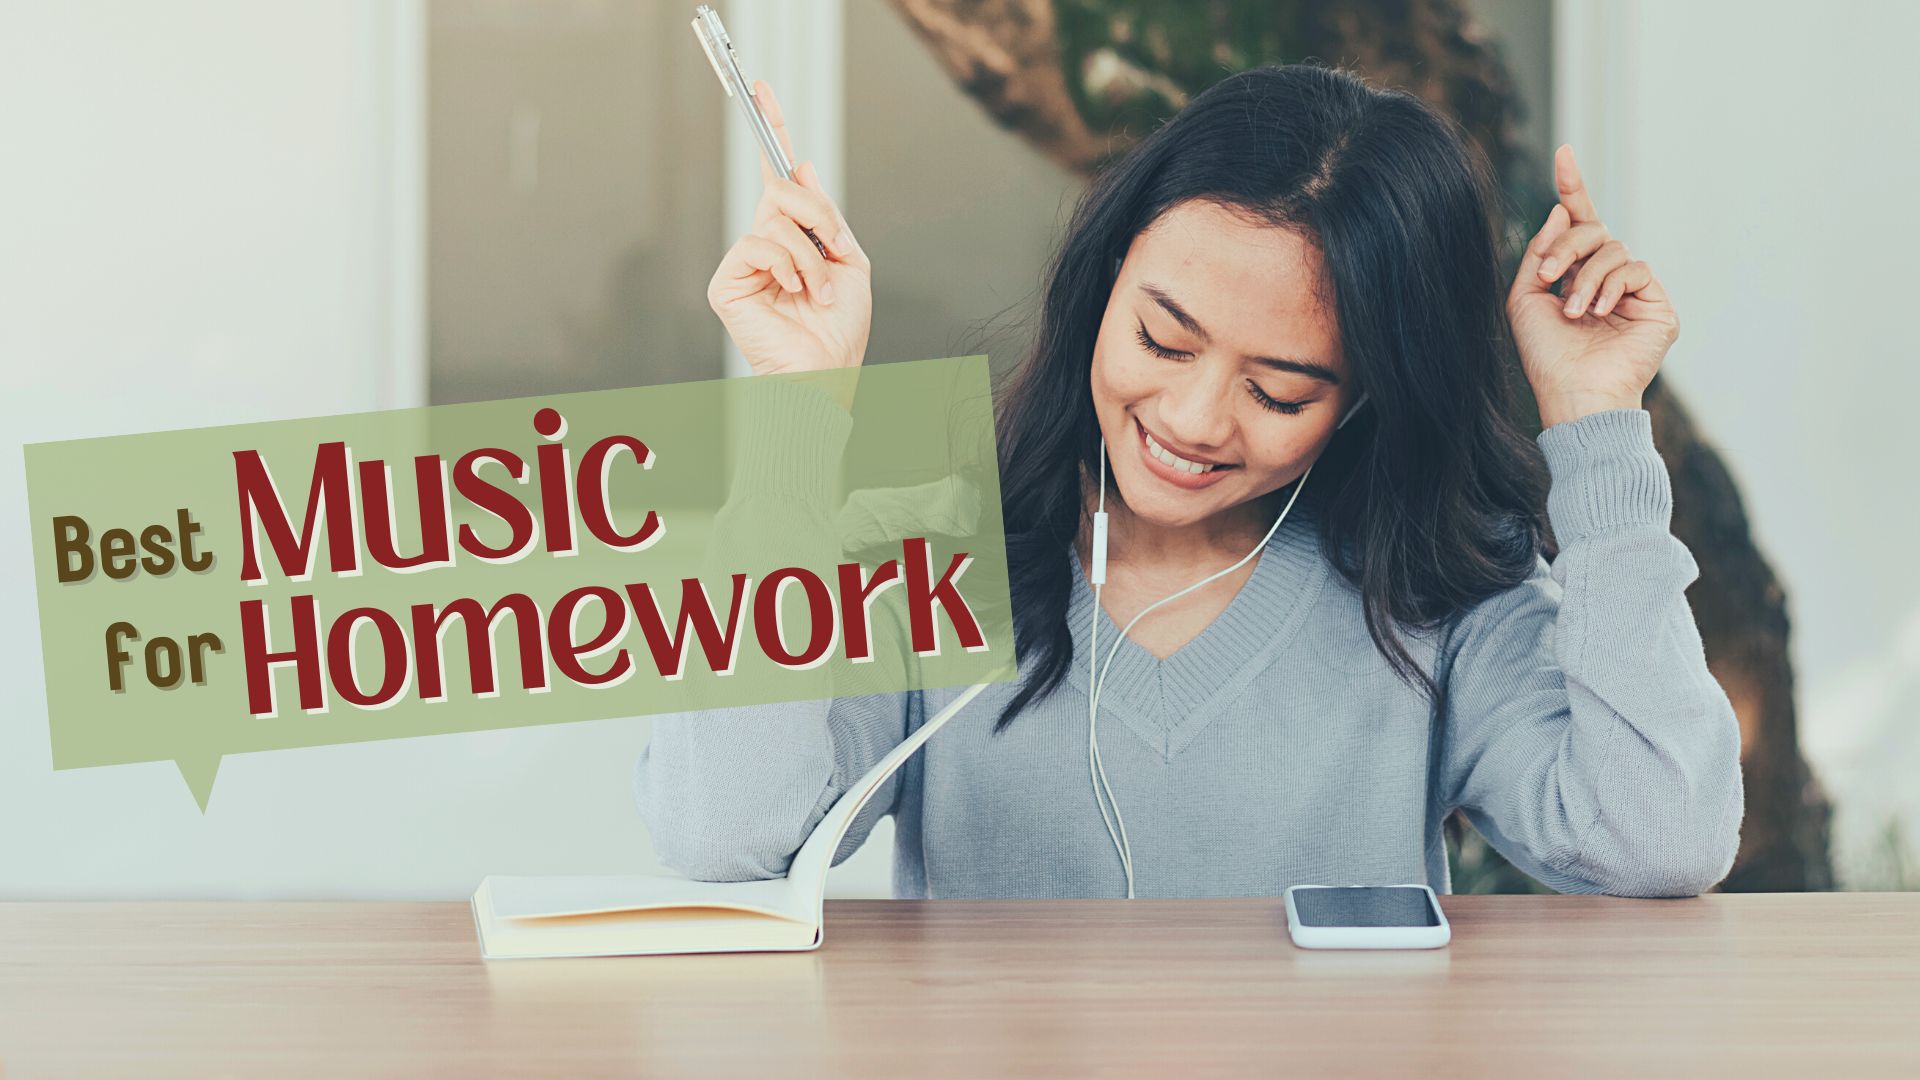 what's the best music for homework